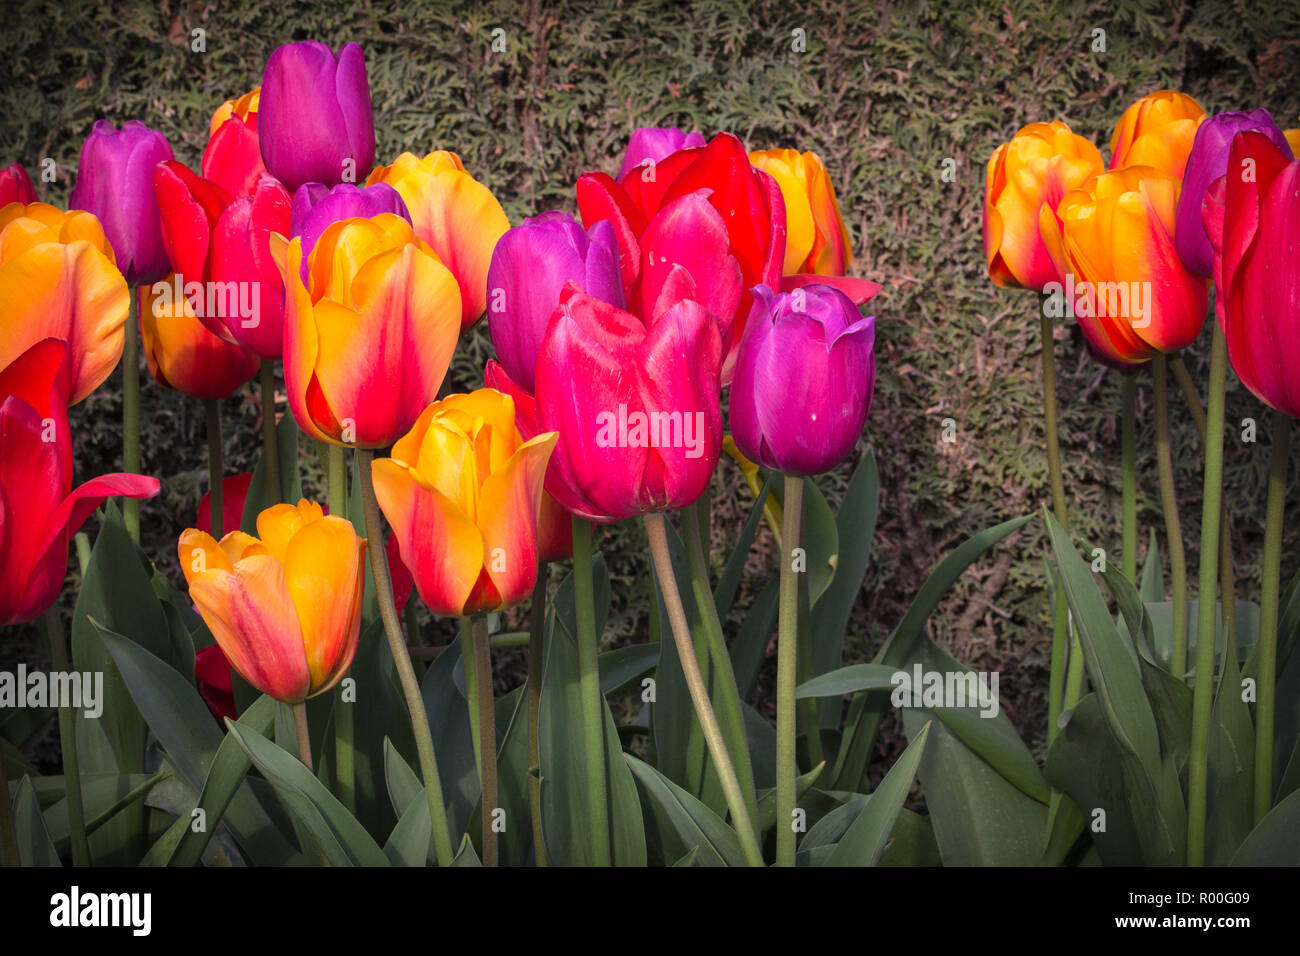 Collection of colorful tulips growing in front of a mossy background.  Vibrant petals of red, yellow, purple and pink contrast greenery Stock Photo